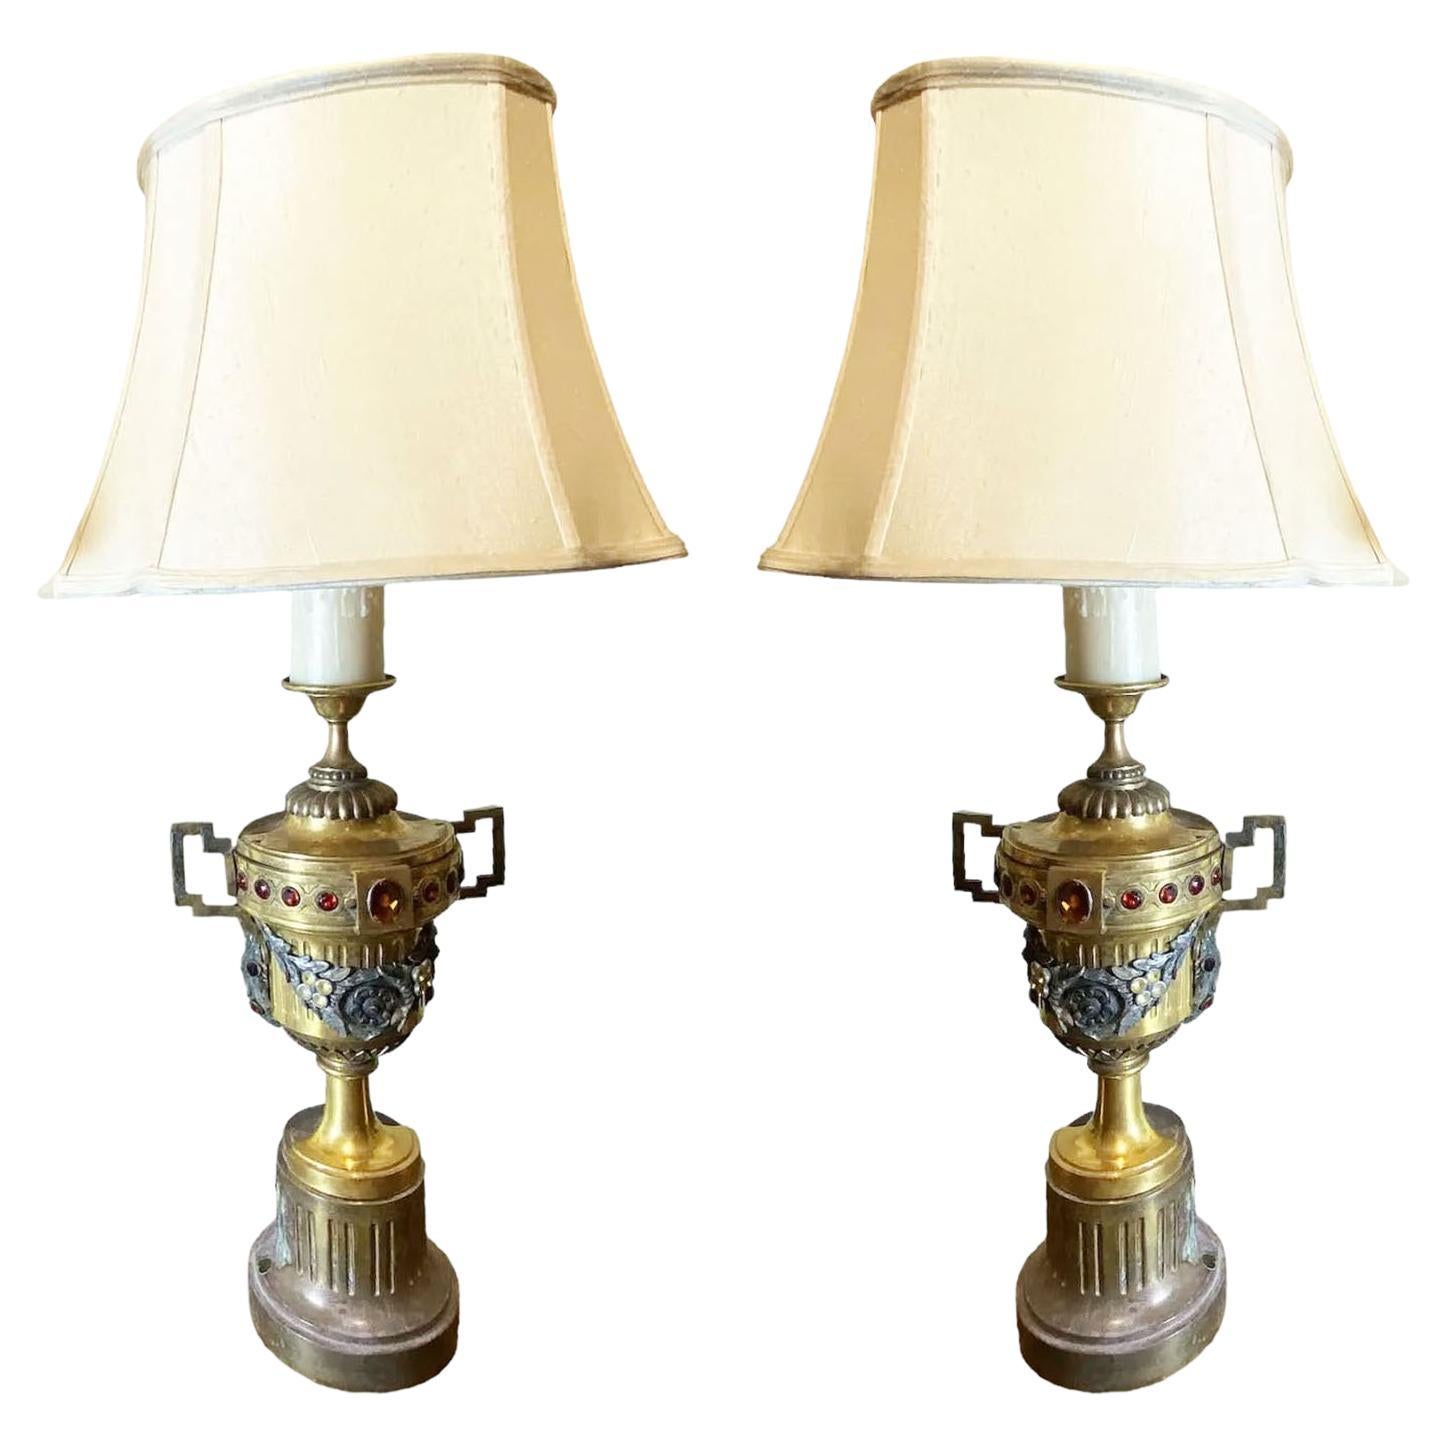 Gilt Metal Urns with Jewels and Swags as Lamps